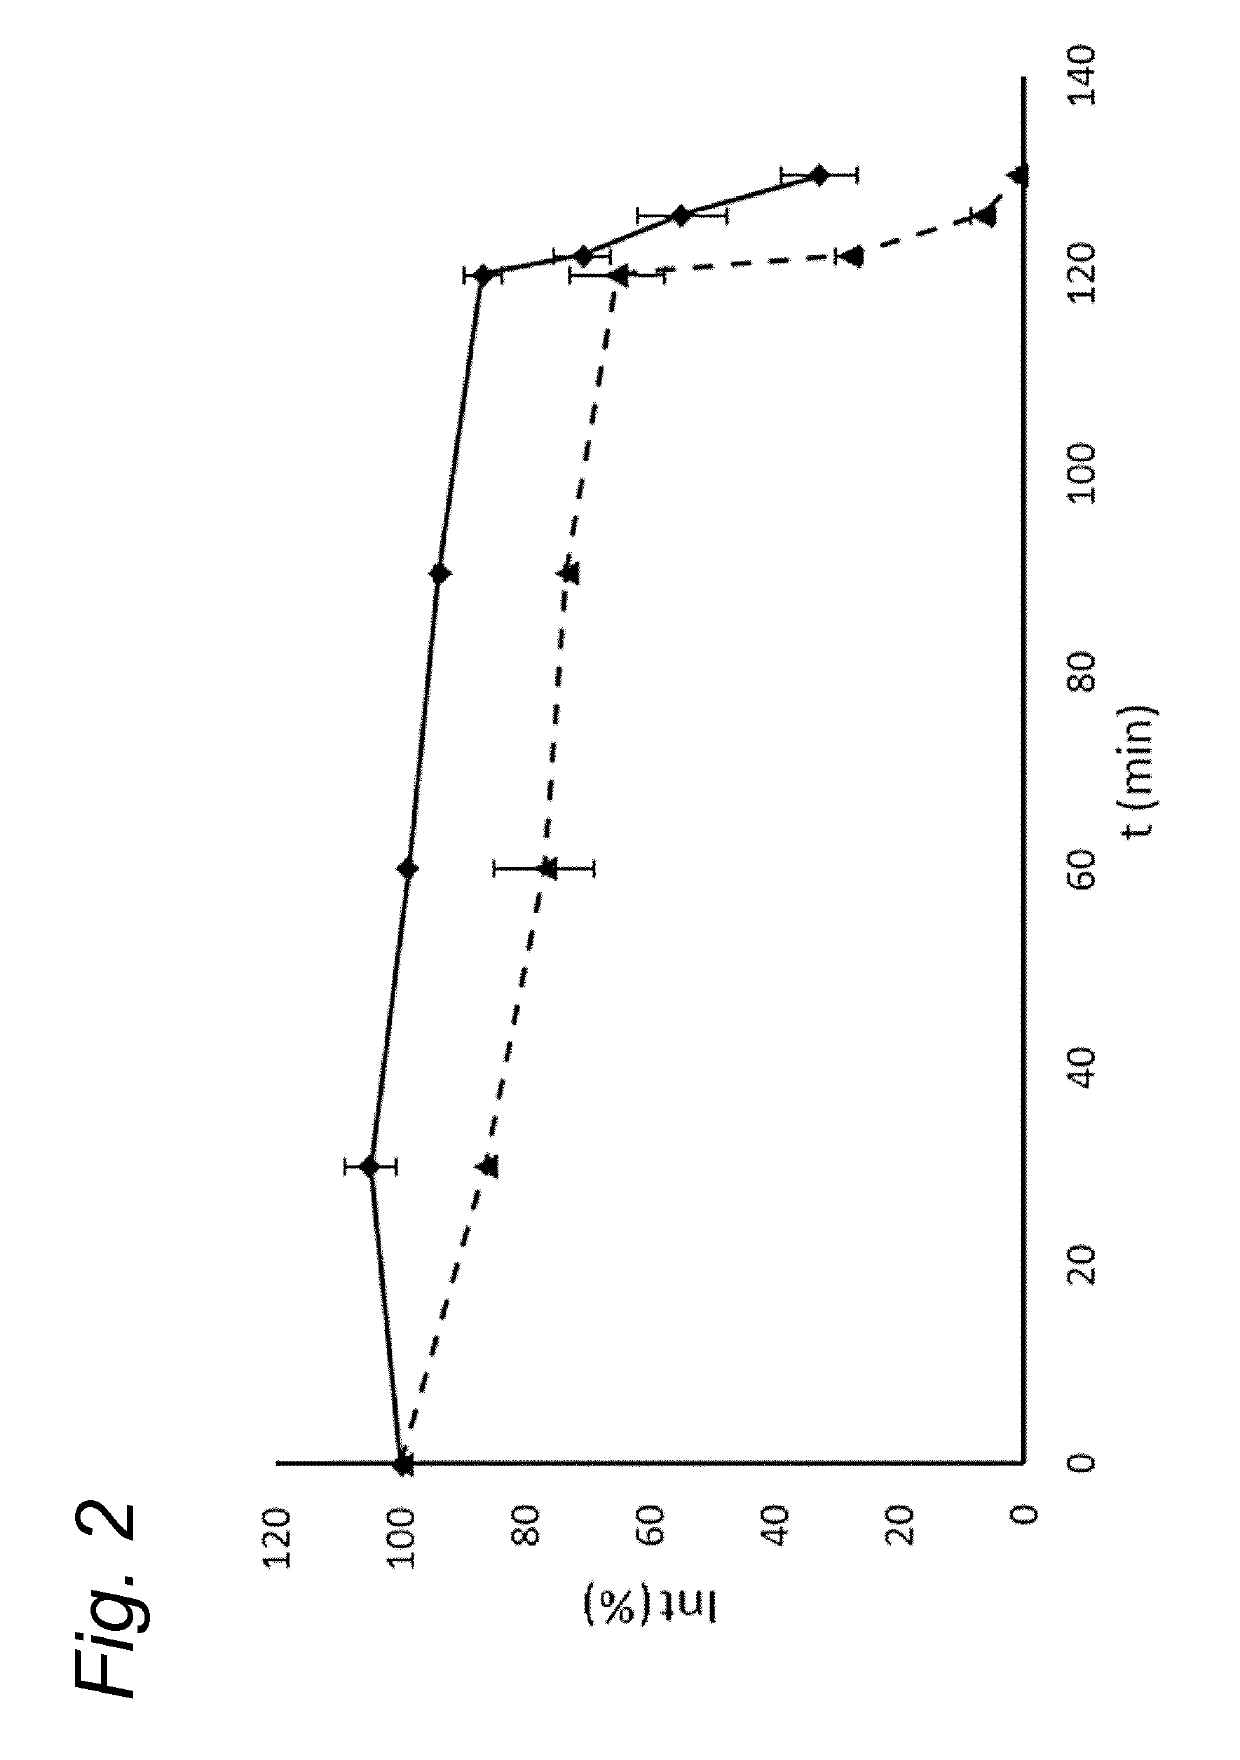 Process for producing infant formula products and acidic dairy products from milk